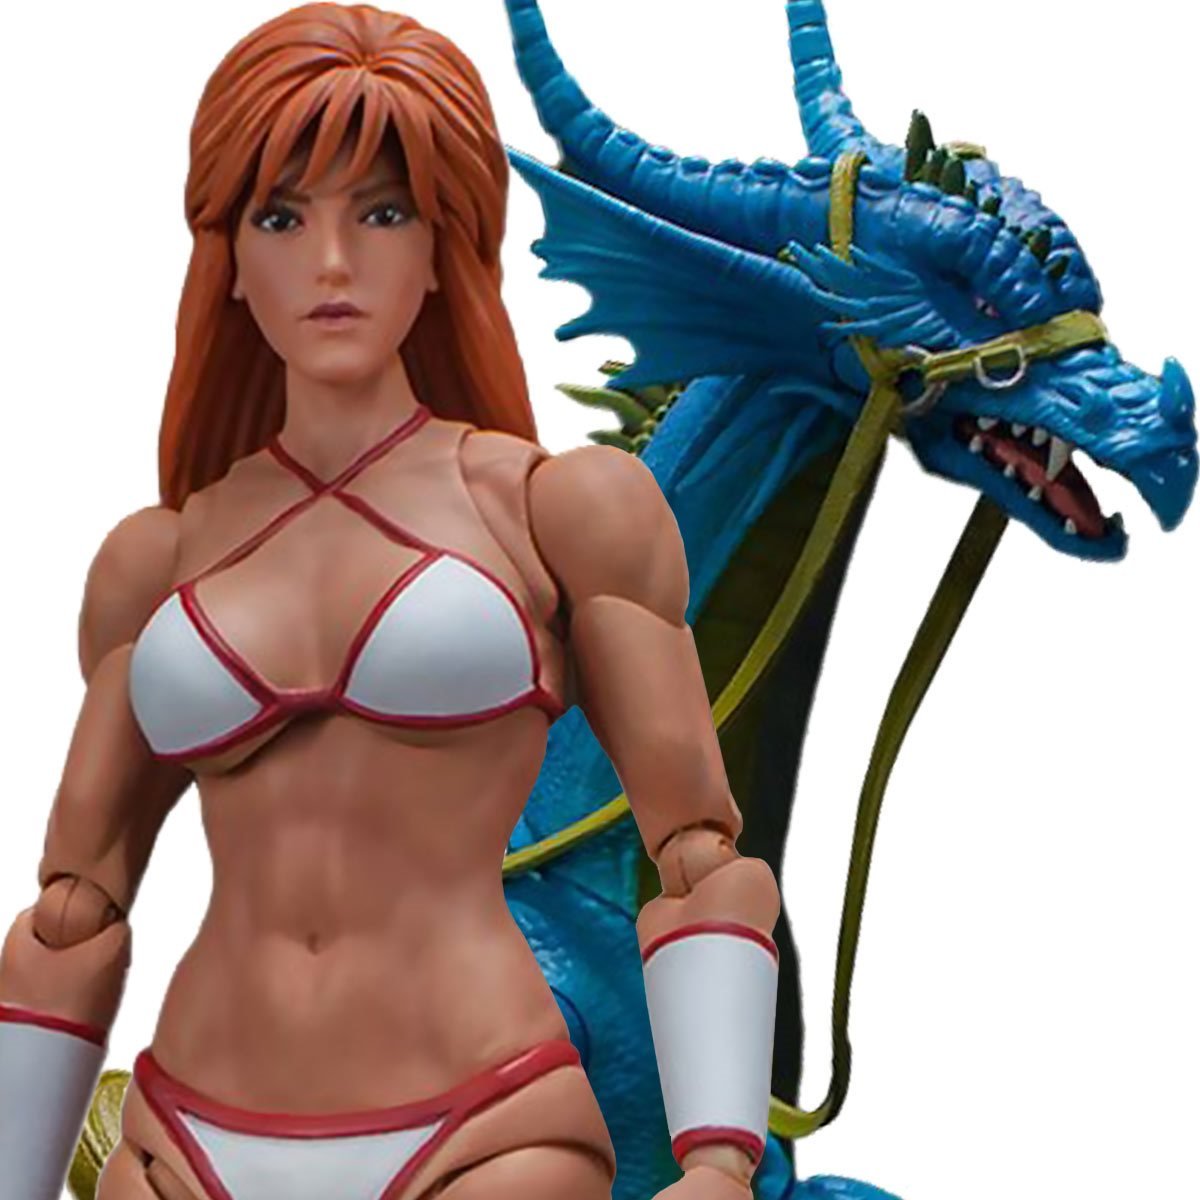 Golden Axe Tyris Flare And Blue Dragon 1 12 Scale Action Figure